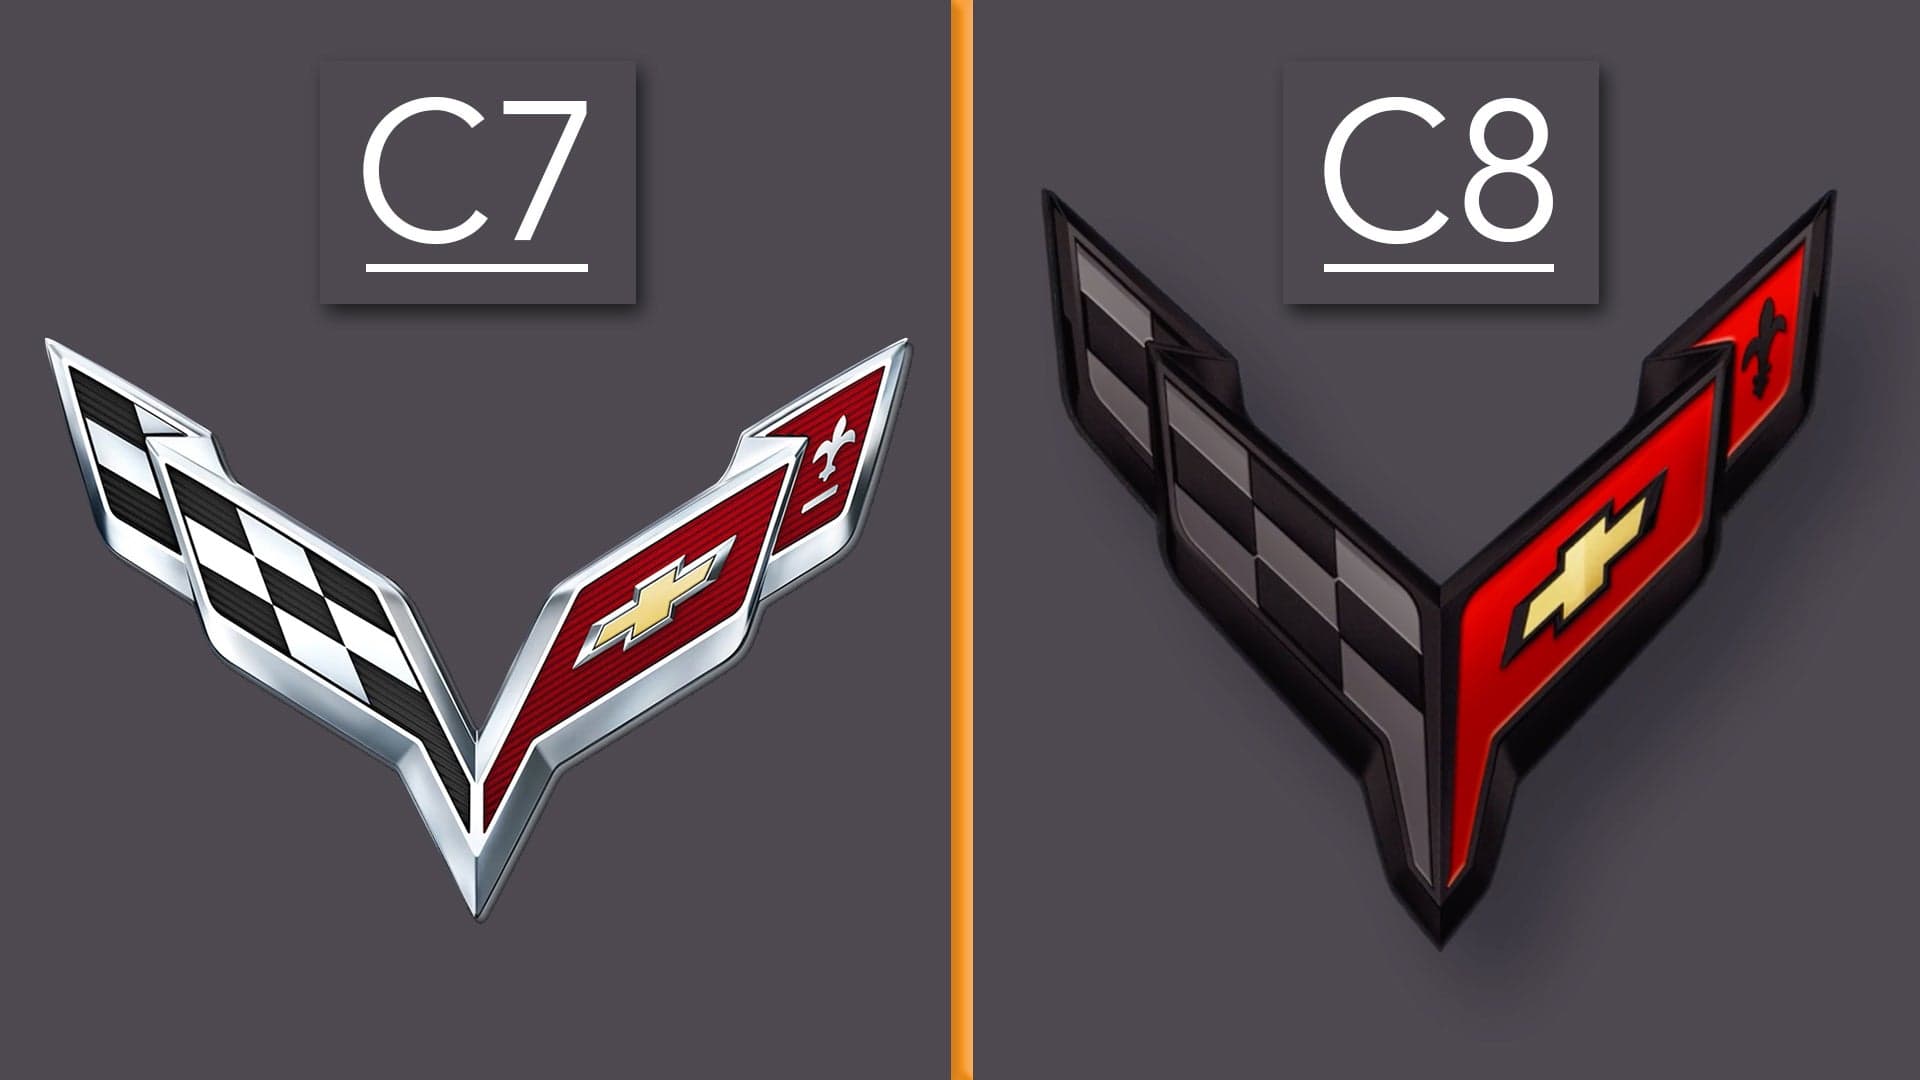 Here’s the New Badge for the Mid-Engined 2020 Chevrolet Corvette C8